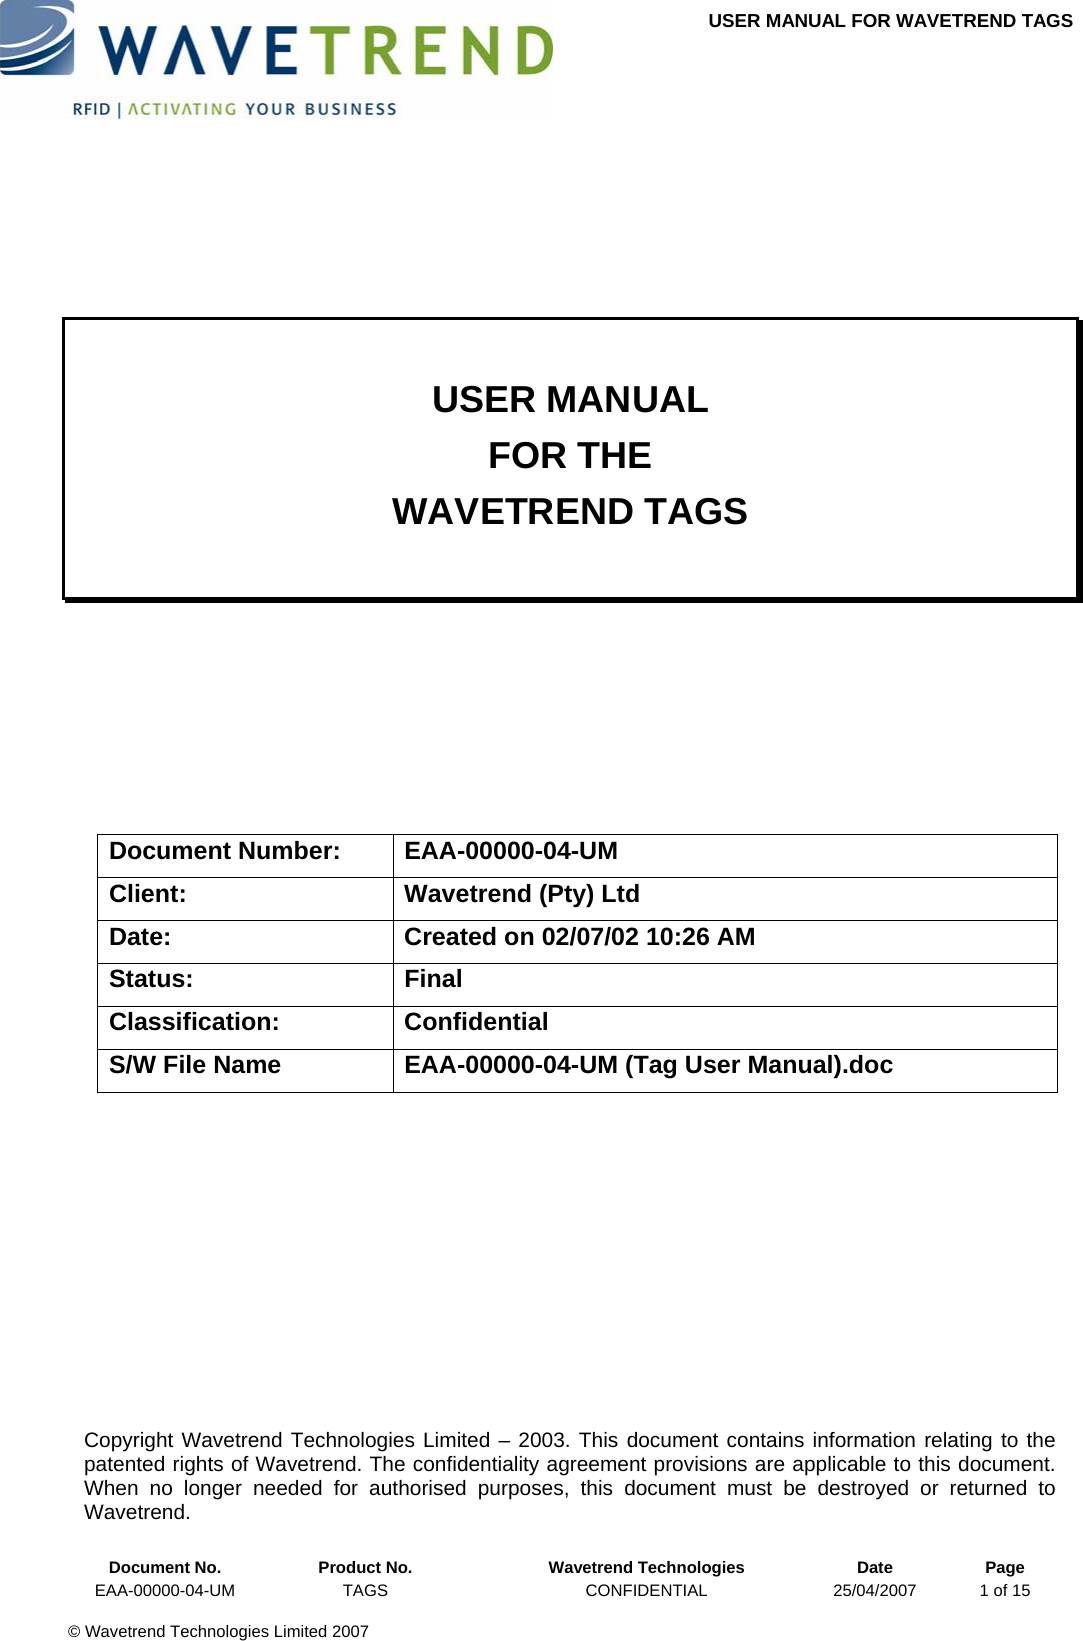 USER MANUAL FOR WAVETREND TAGS        USER MANUAL FOR THE WAVETREND TAGS       Document Number:  EAA-00000-04-UM Client:  Wavetrend (Pty) Ltd Date:  Created on 02/07/02 10:26 AM Status: Final Classification: Confidential S/W File Name  EAA-00000-04-UM (Tag User Manual).doc            Document No.  Product No.  Wavetrend Technologies  Date  Page Copyright Wavetrend Technologies Limited – 2003. This document contains information relating to the patented rights of Wavetrend. The confidentiality agreement provisions are applicable to this document.  When no longer needed for authorised purposes, this document must be destroyed or returned to Wavetrend. EAA-00000-04-UM  TAGS  CONFIDENTIAL  25/04/2007  1 of 15  © Wavetrend Technologies Limited 2007  